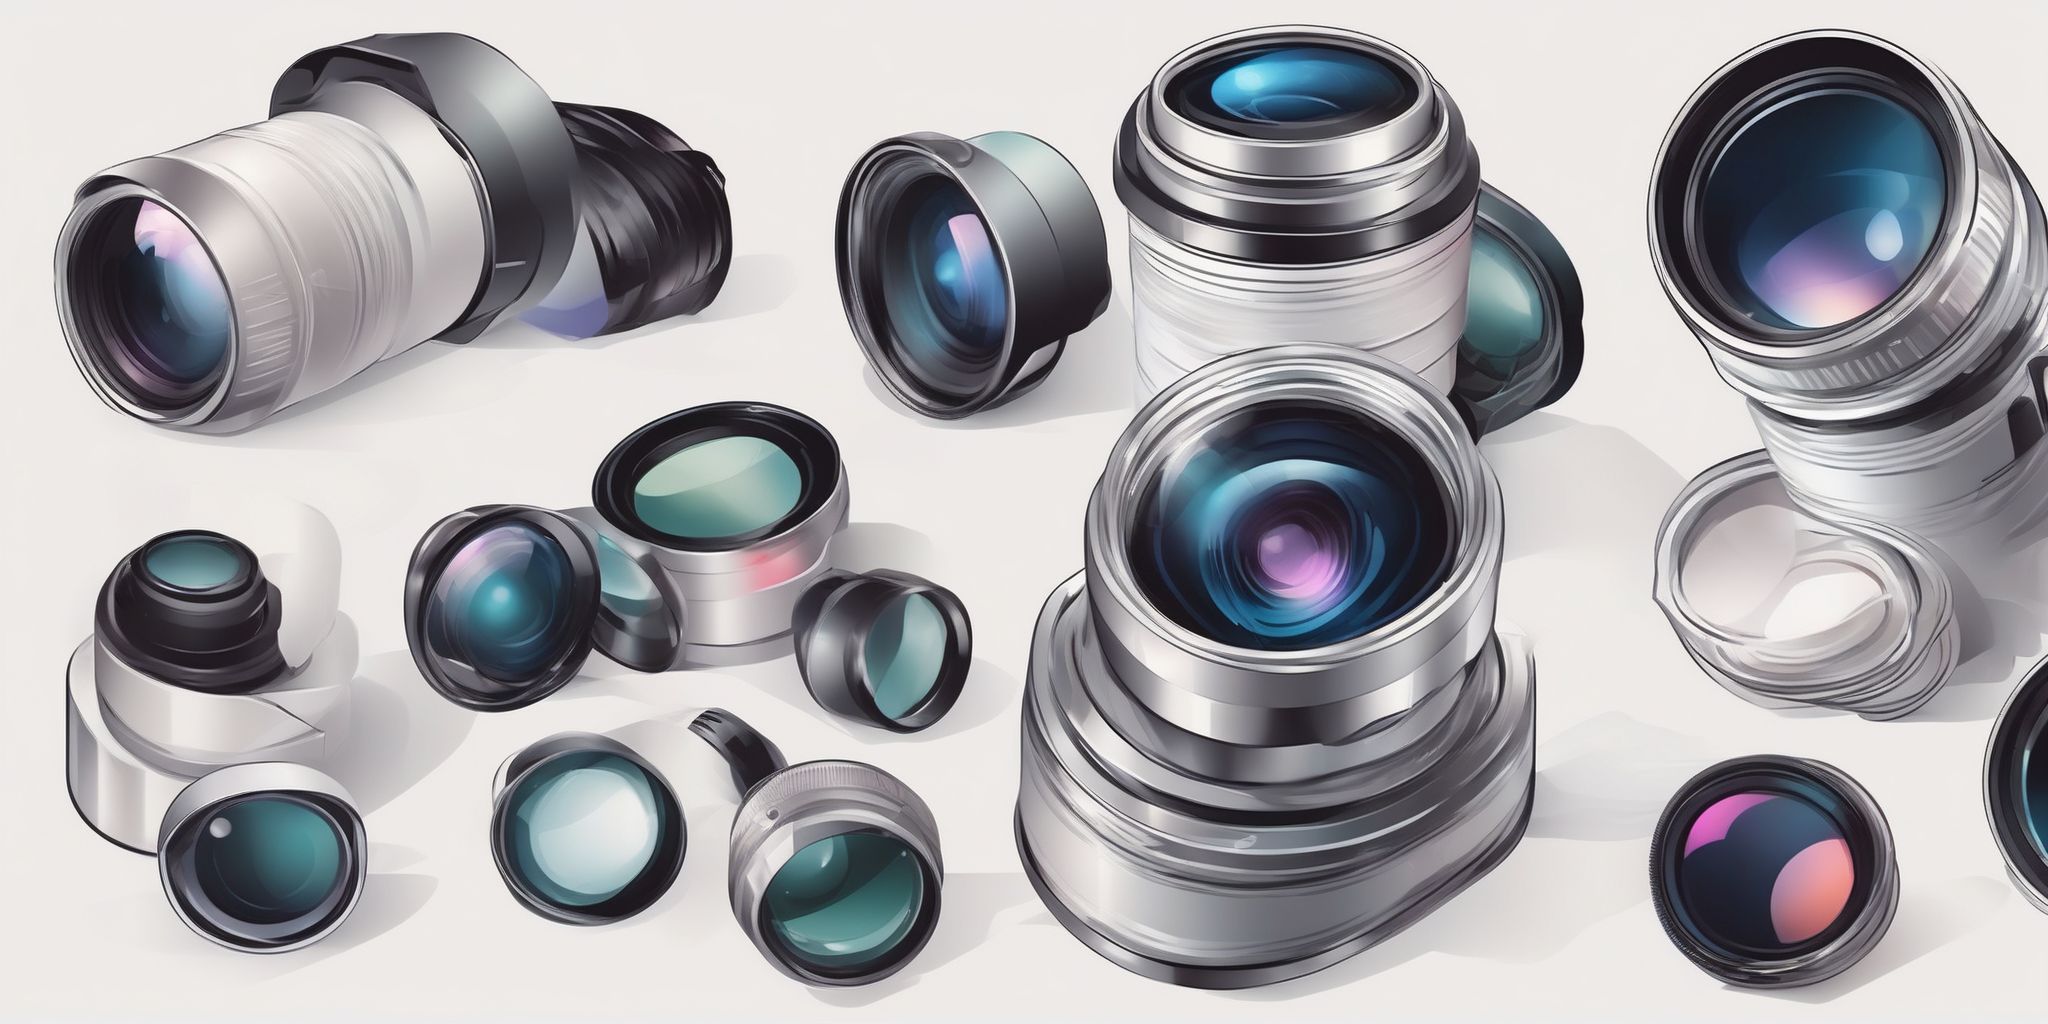 lens in illustration style with gradients and white background